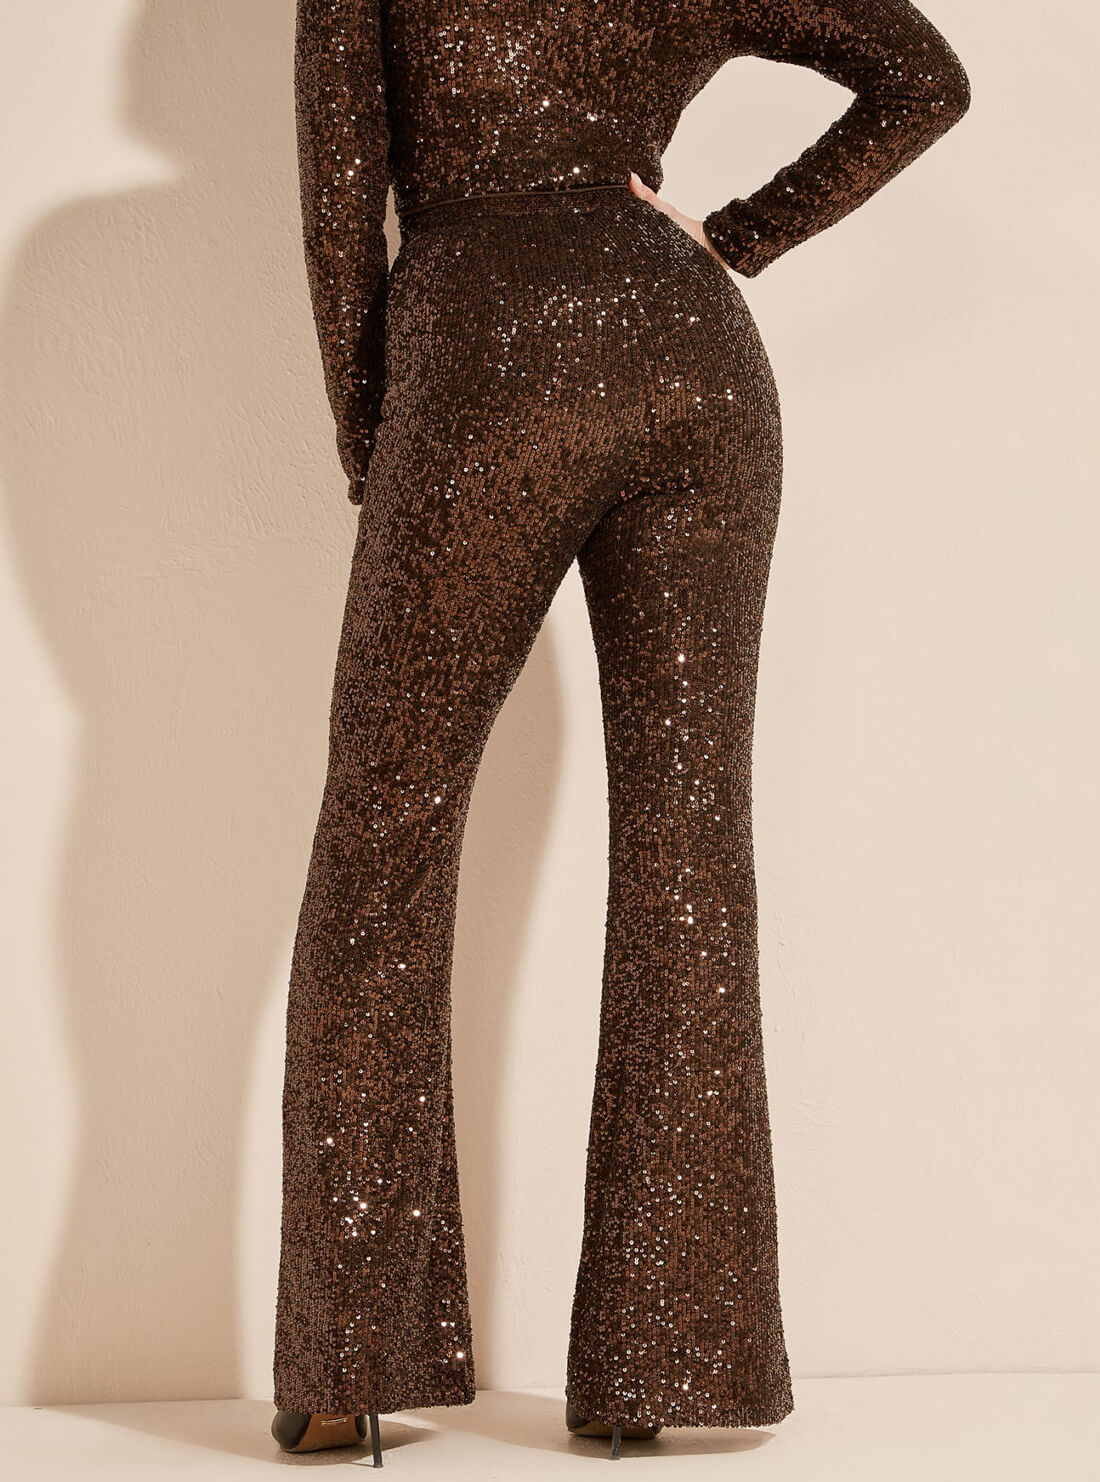 GUESS Women's Marciano Brown Moonlight Sequin Pants 2RGB006111A Back View